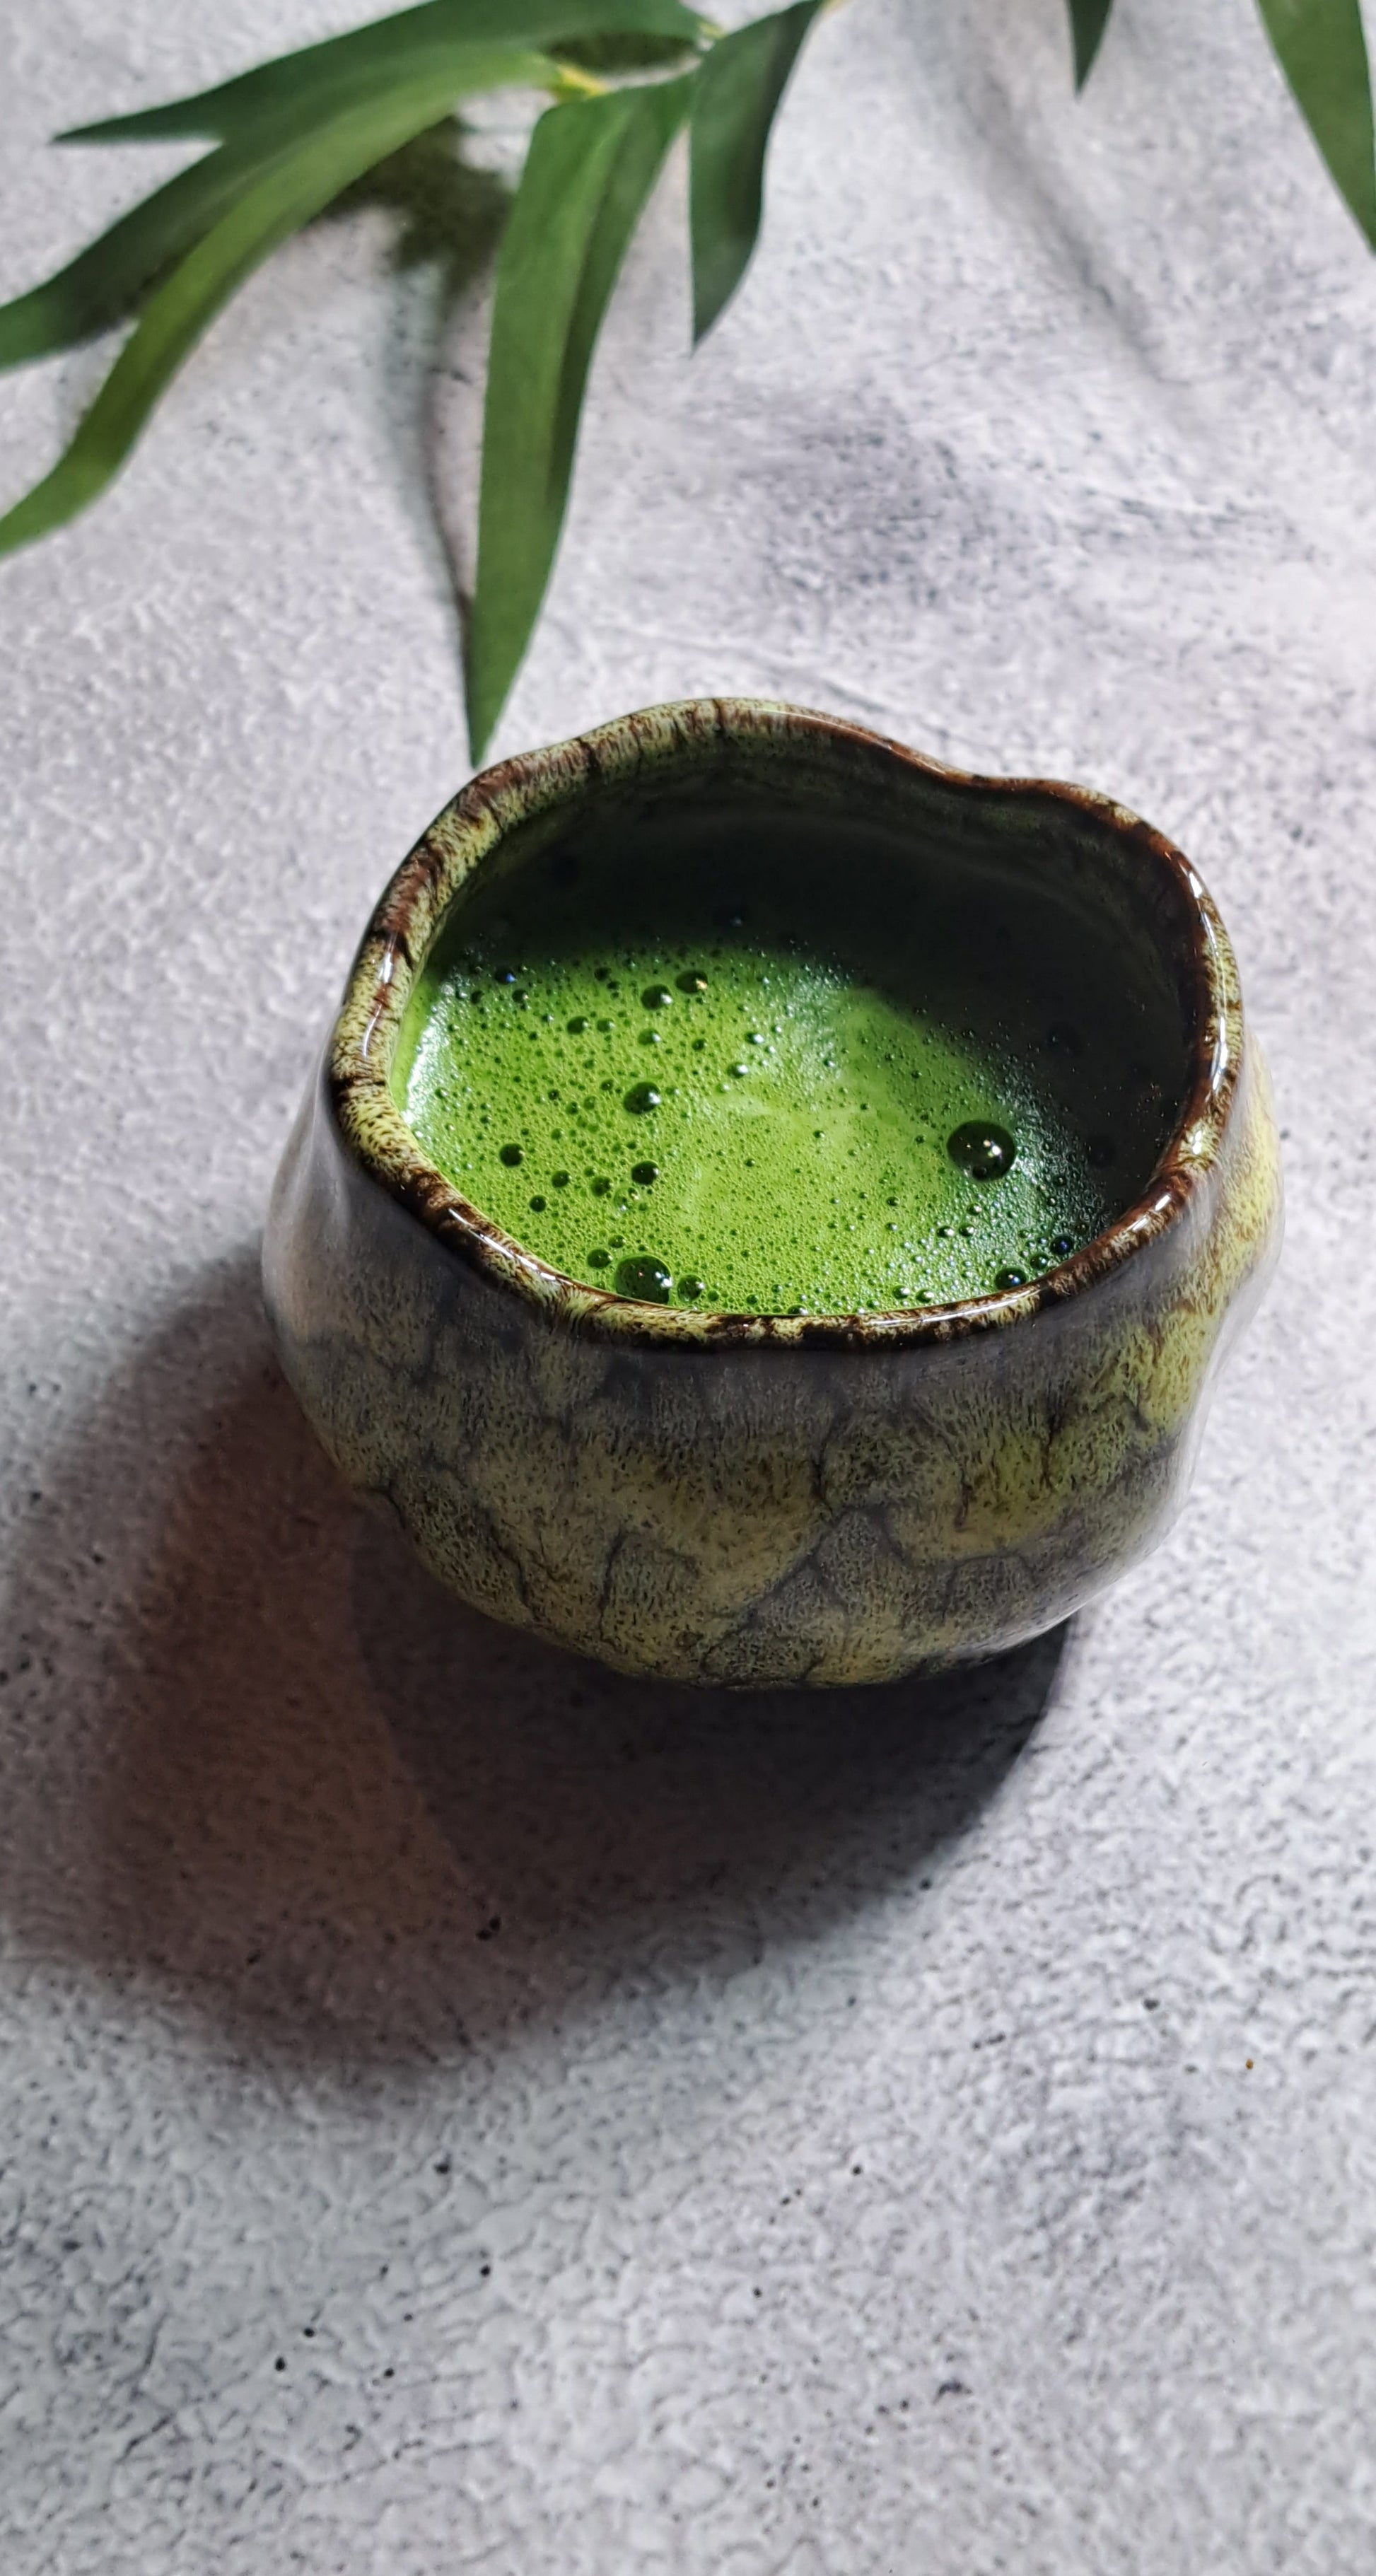 An authentic, hand-crafted ceramic matcha tea bowl, made for the true matcha lover who wants to recreate a traditional matcha ceremony.  Material: Ceramic, Porcelain, heat resistant Color: Blue brown. Volume: 160 ml